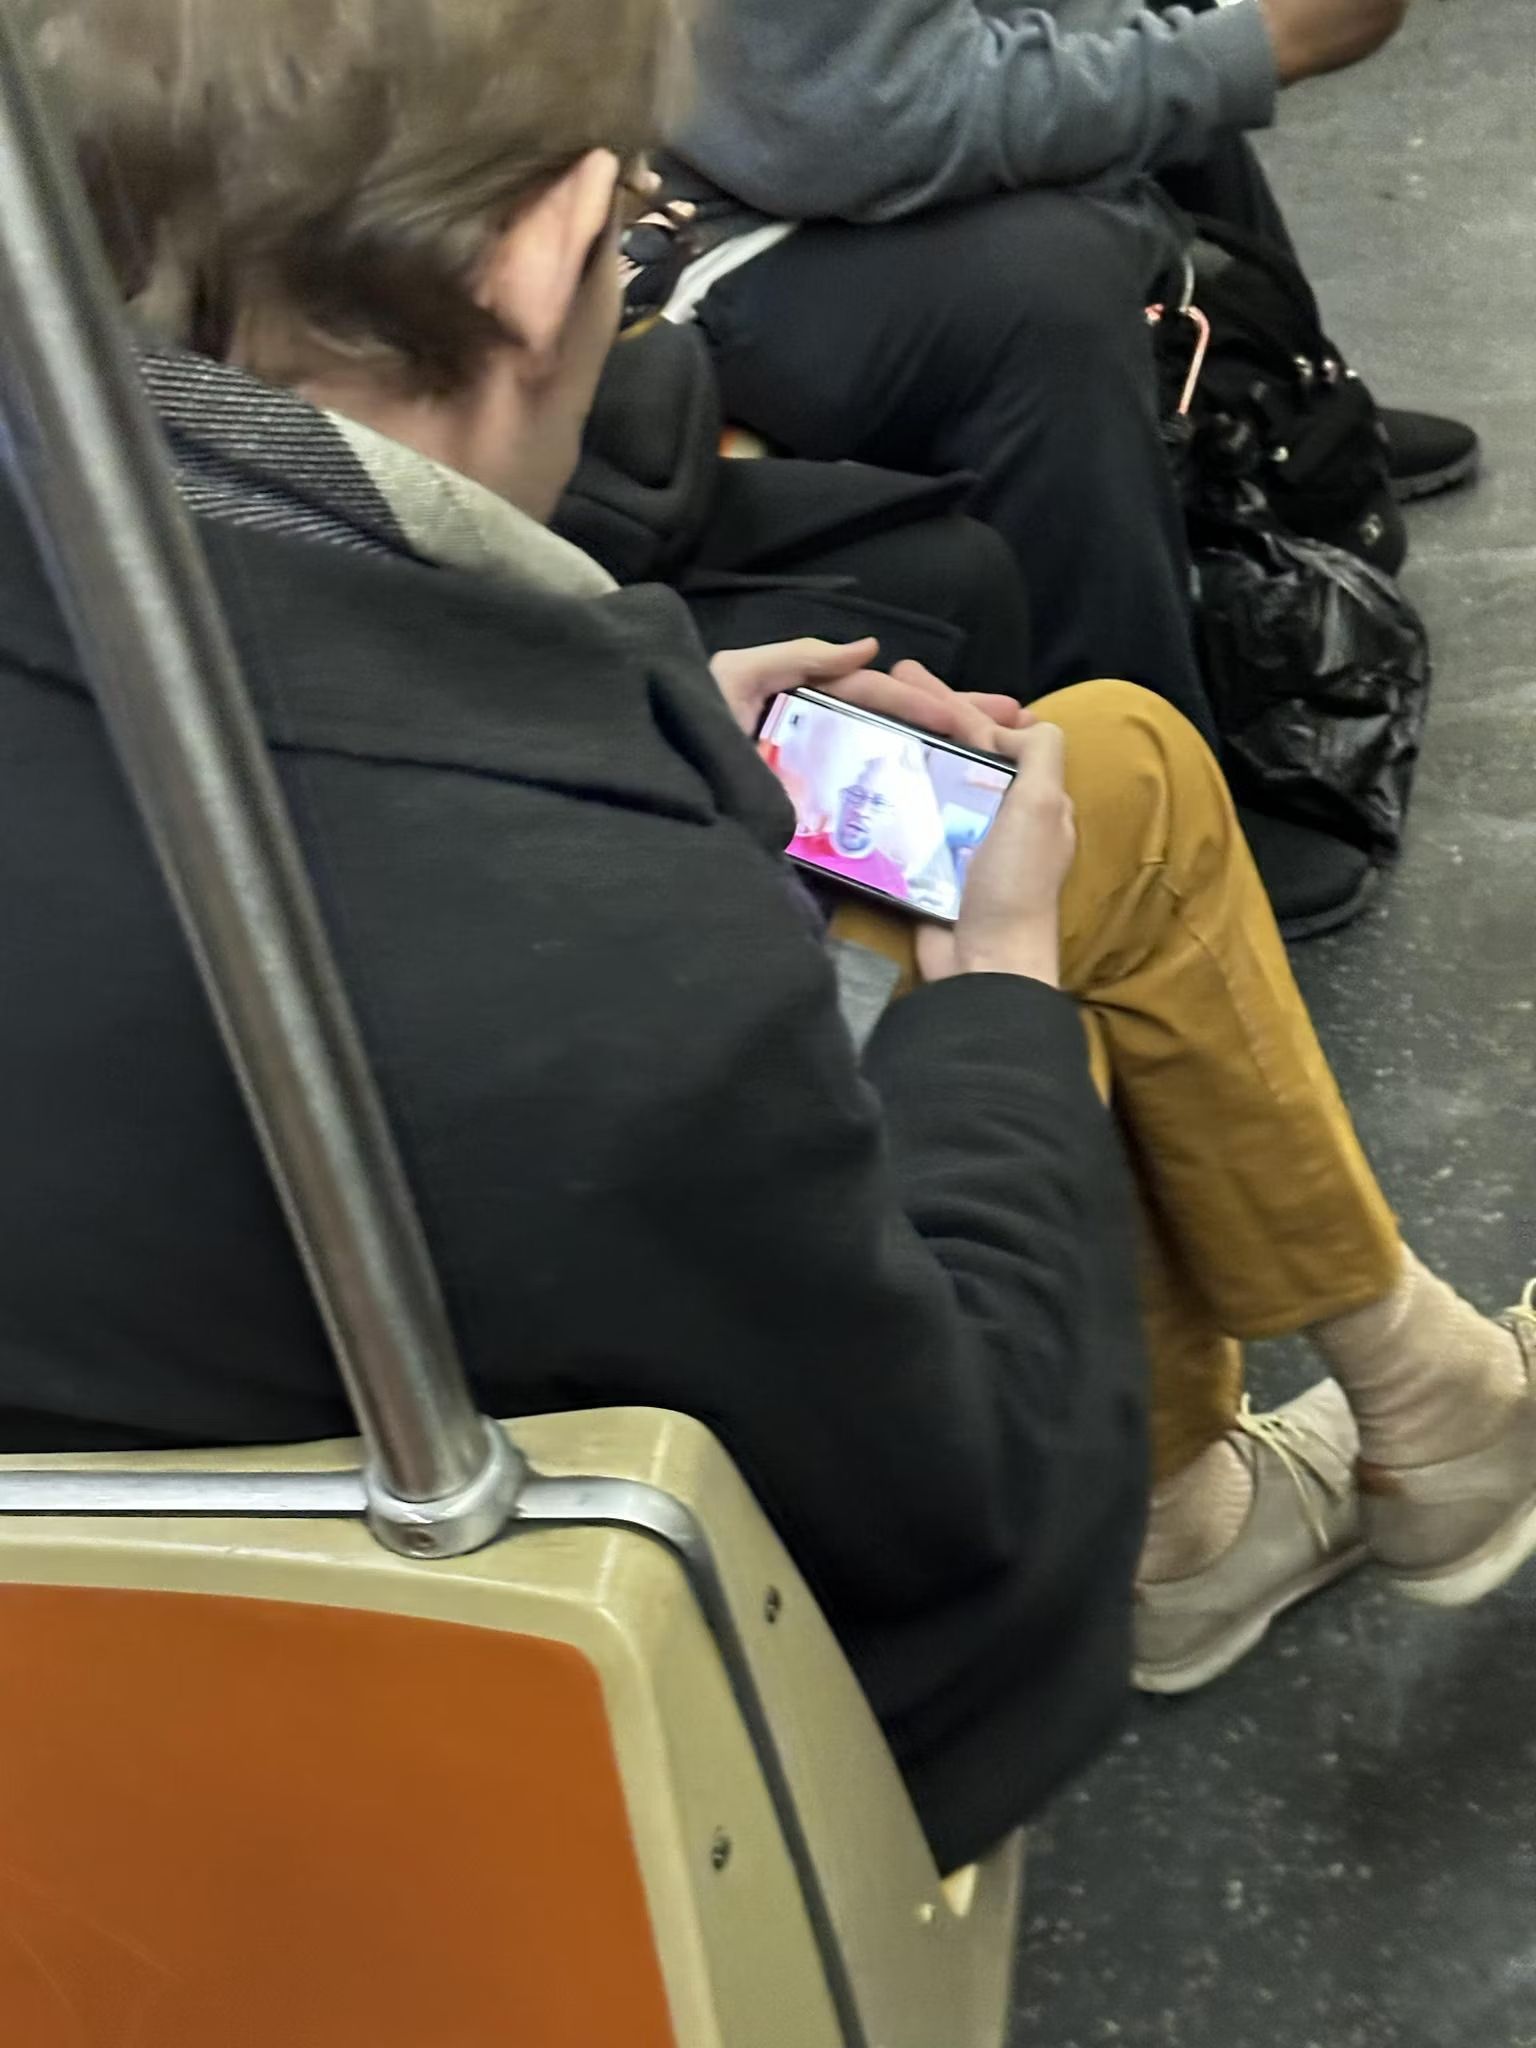 Pixel Fold Spotted on Subway